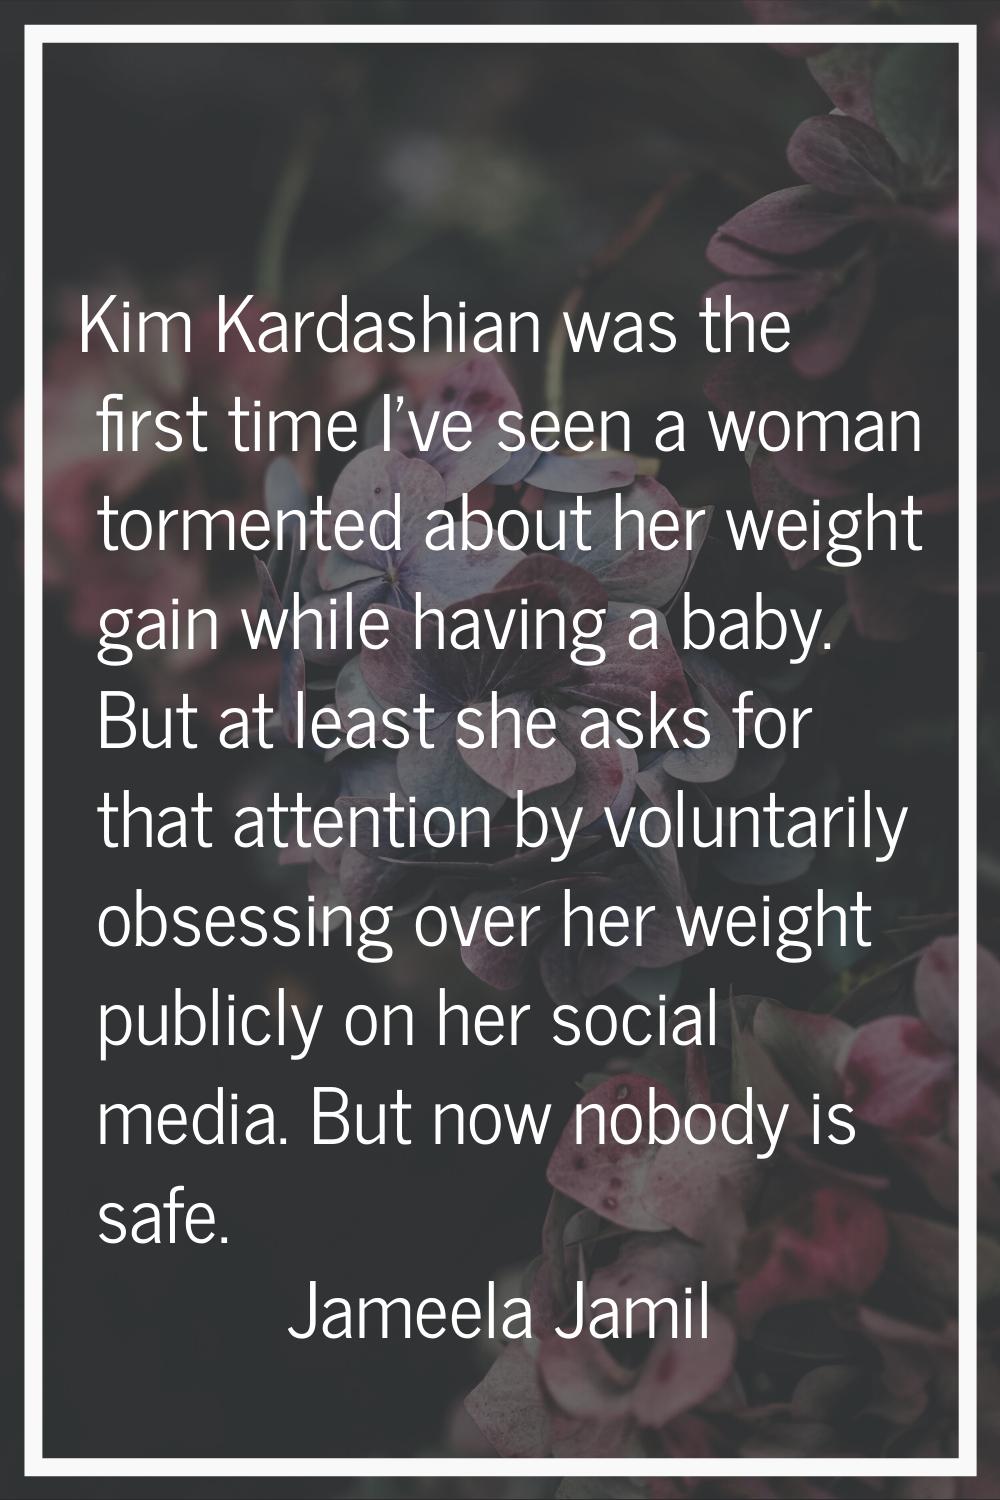 Kim Kardashian was the first time I've seen a woman tormented about her weight gain while having a 